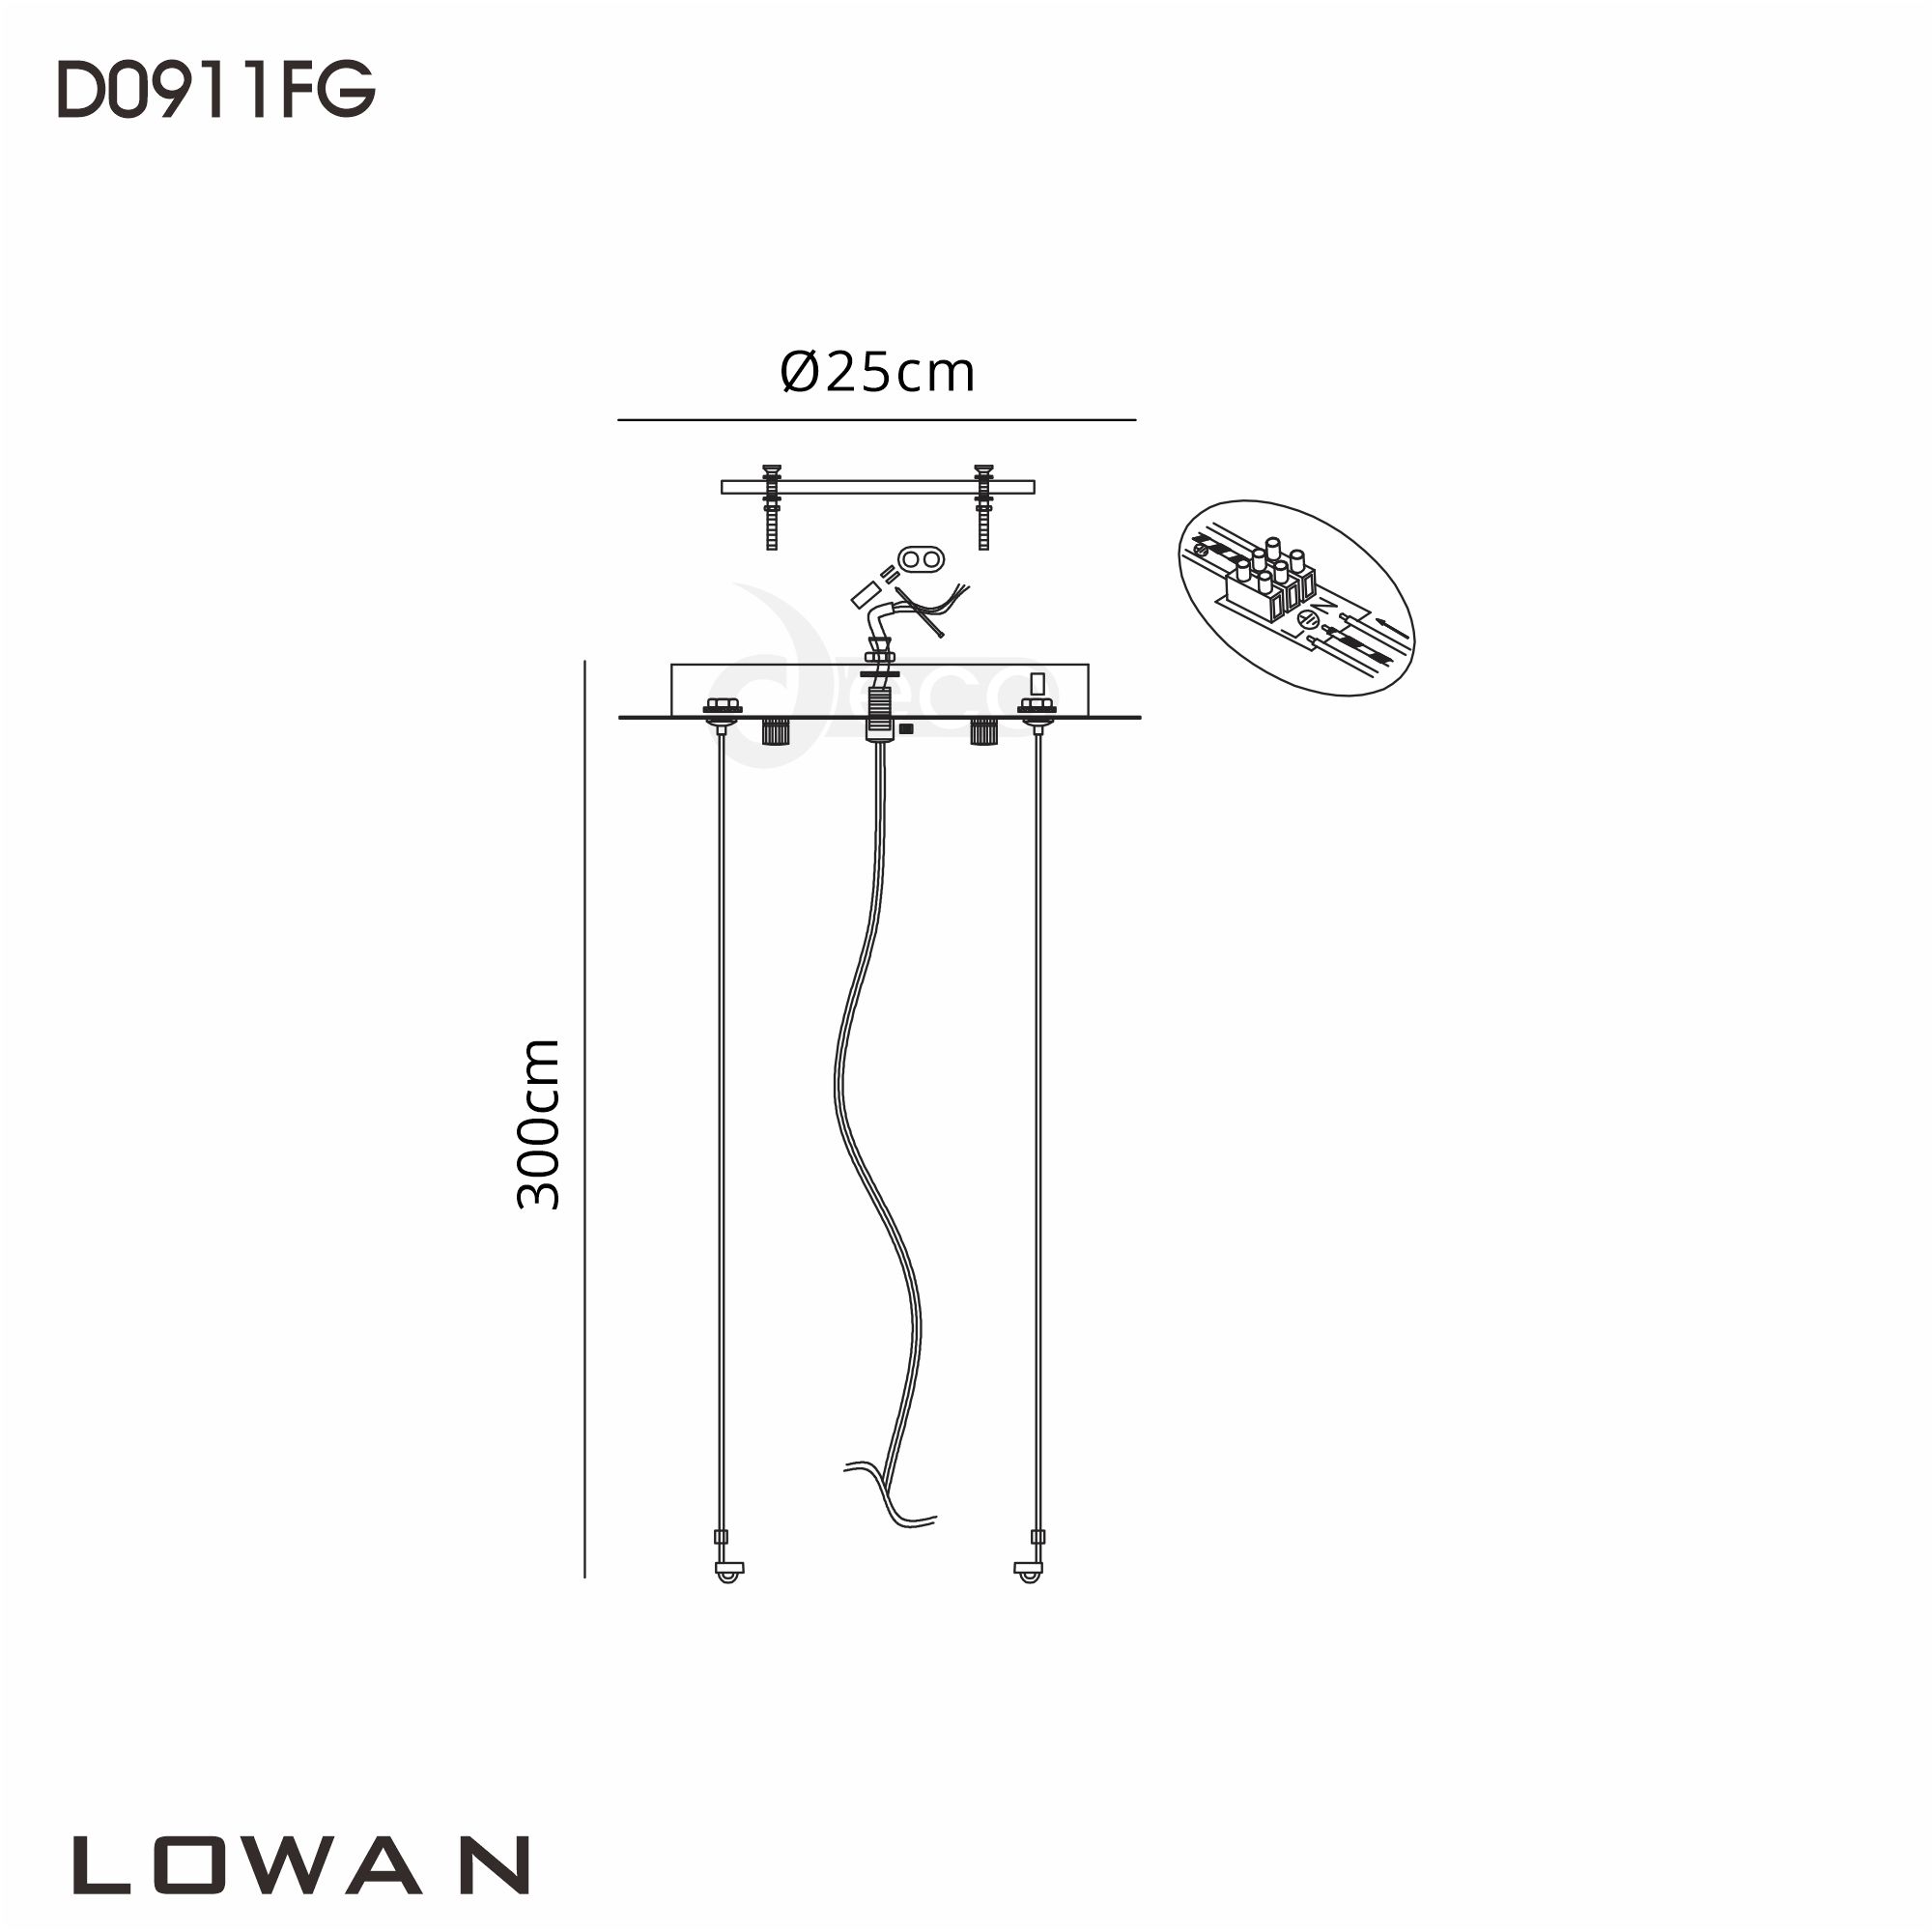 D0930FG/GO  Lowan 890mm, 3m Suspension Plate c/w Power Cable To Lower Flush Fittings, French & Painted Gold Max Load 20kg (ONLY TESTED FOR OUR RANGE OF PRODUCTS)